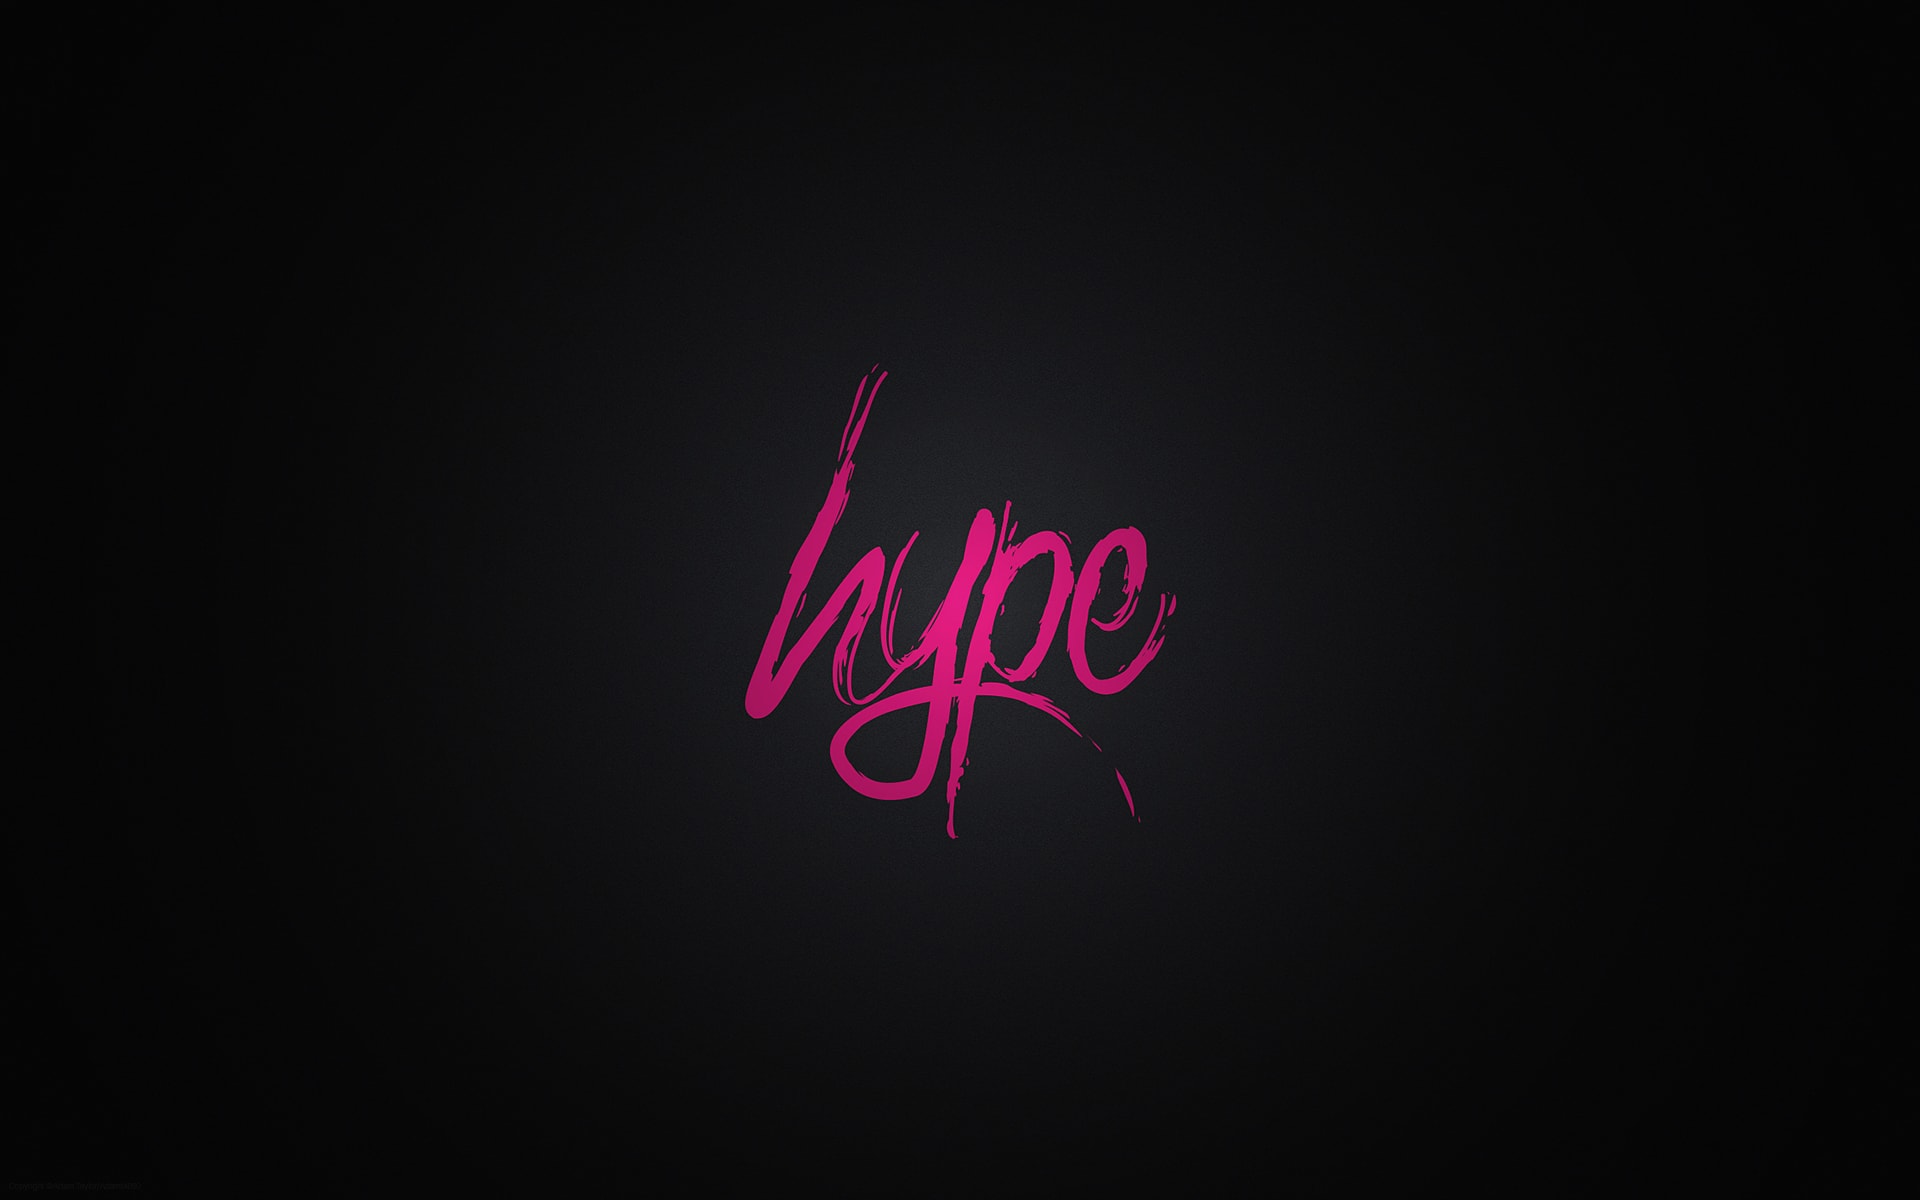 Wallpaper Hype pink typography 1496 Wallpapers and Free Stock